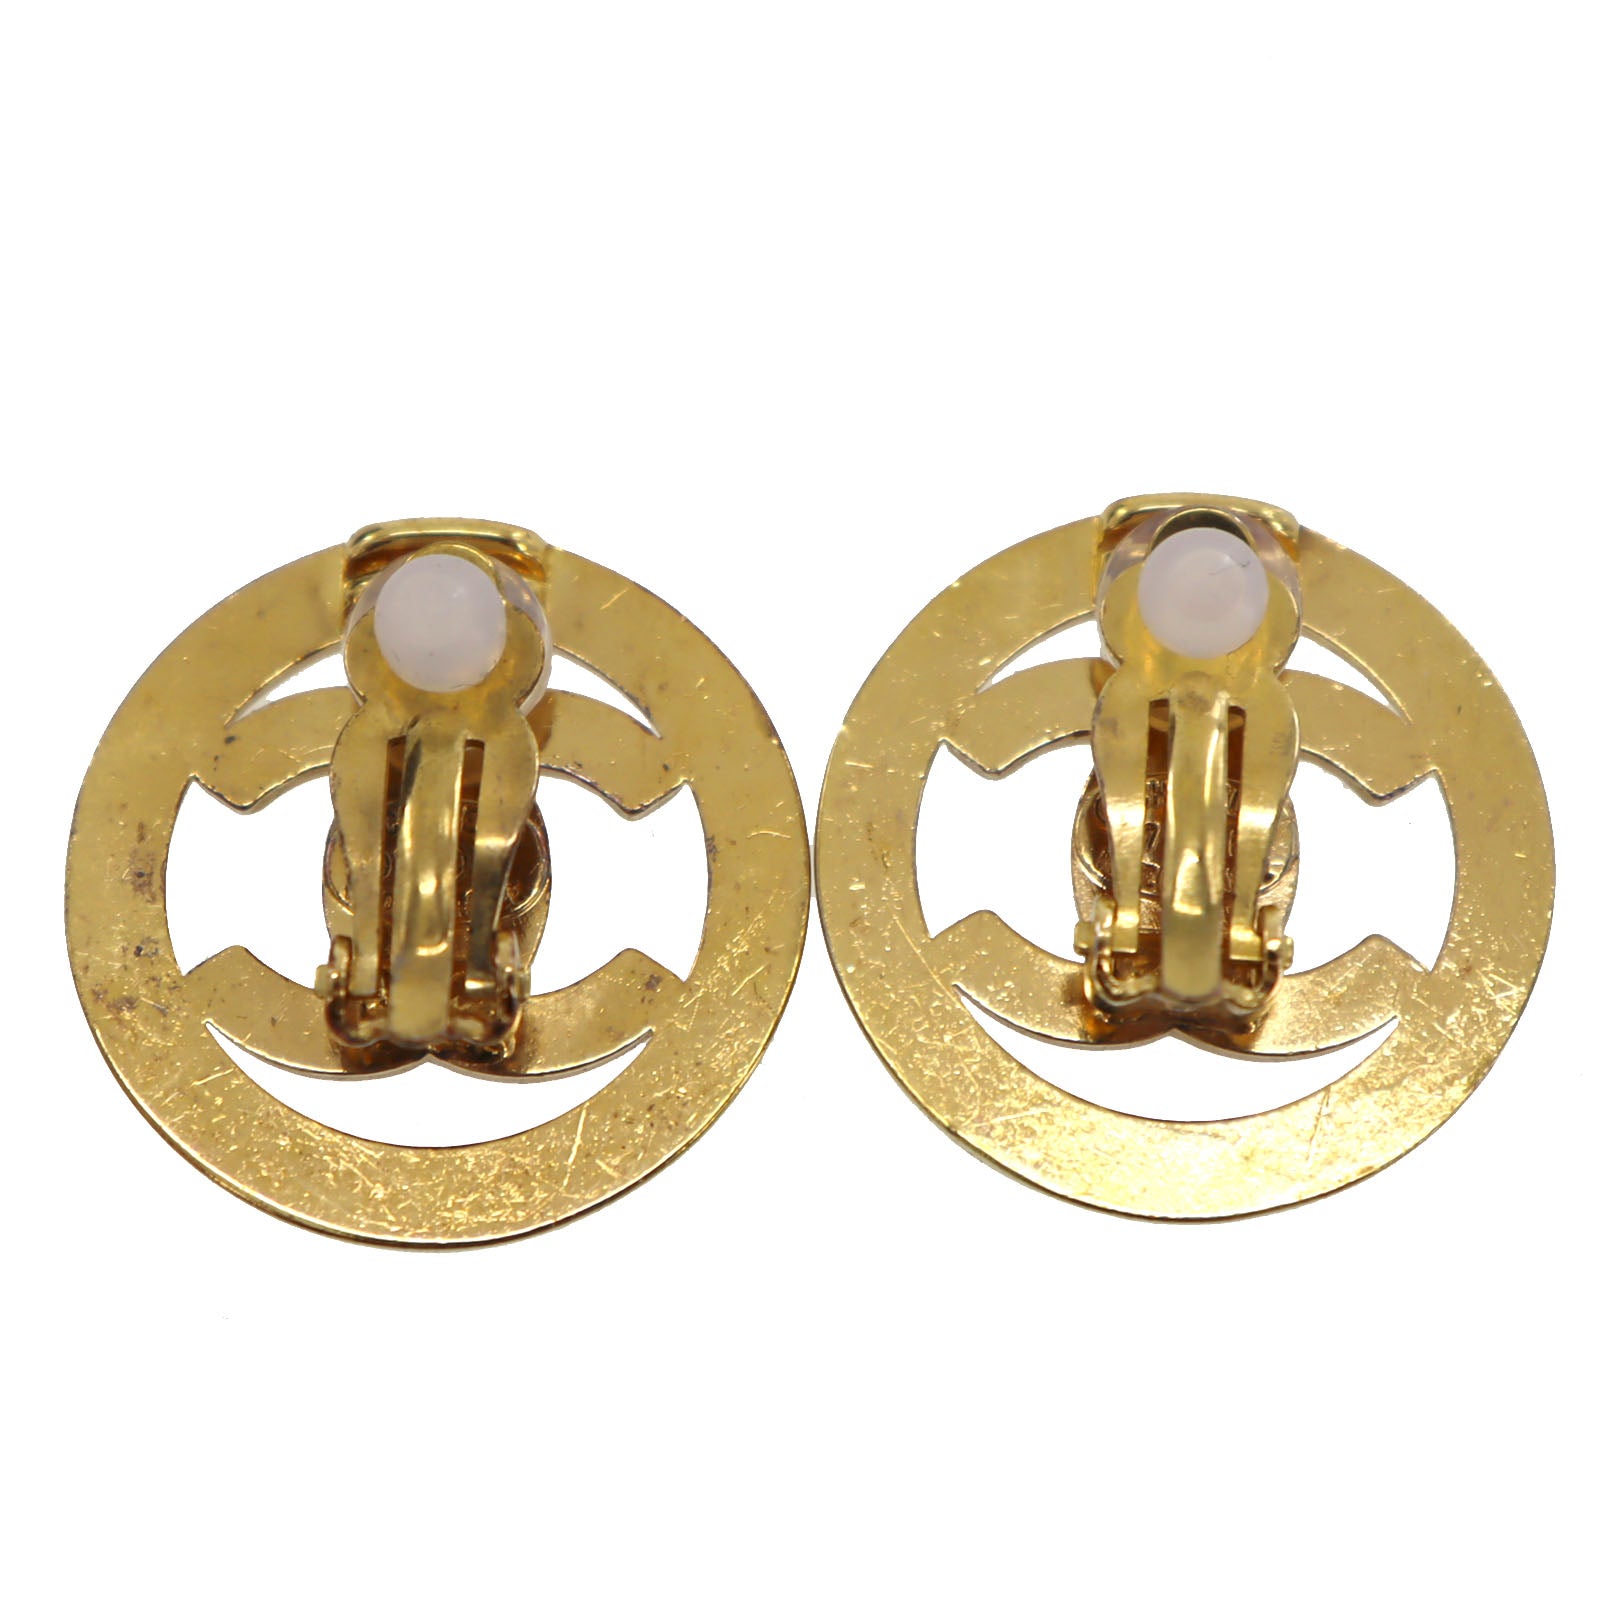 CHANEL CC Logos Used Earrings Gold Clip-On 97P France Vintage #AG858 –  VINTAGE MODE JP